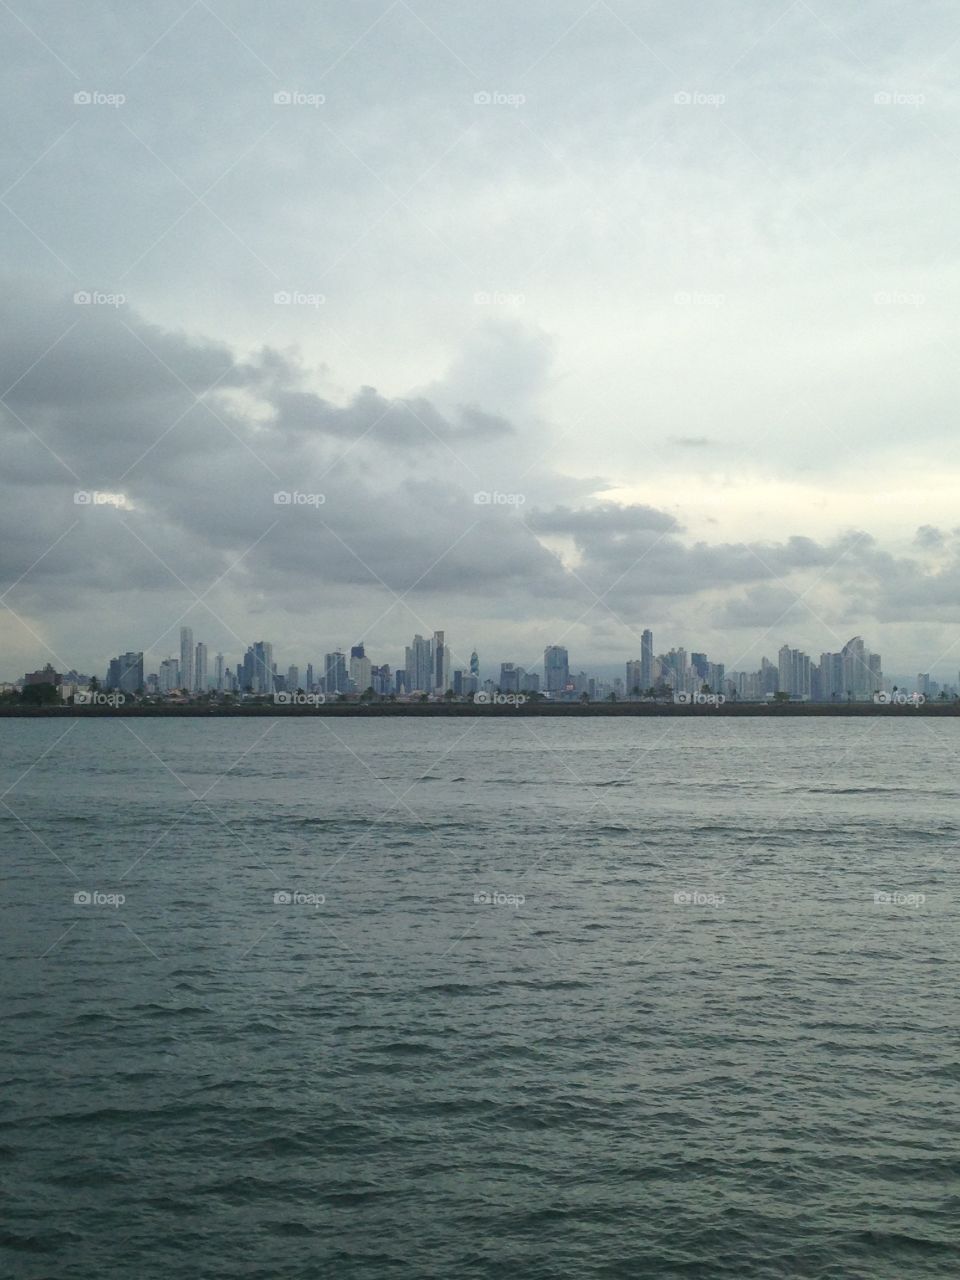 The skyline of Panama City from across the water in the section of Antigua. Clouds roll in over the buildings